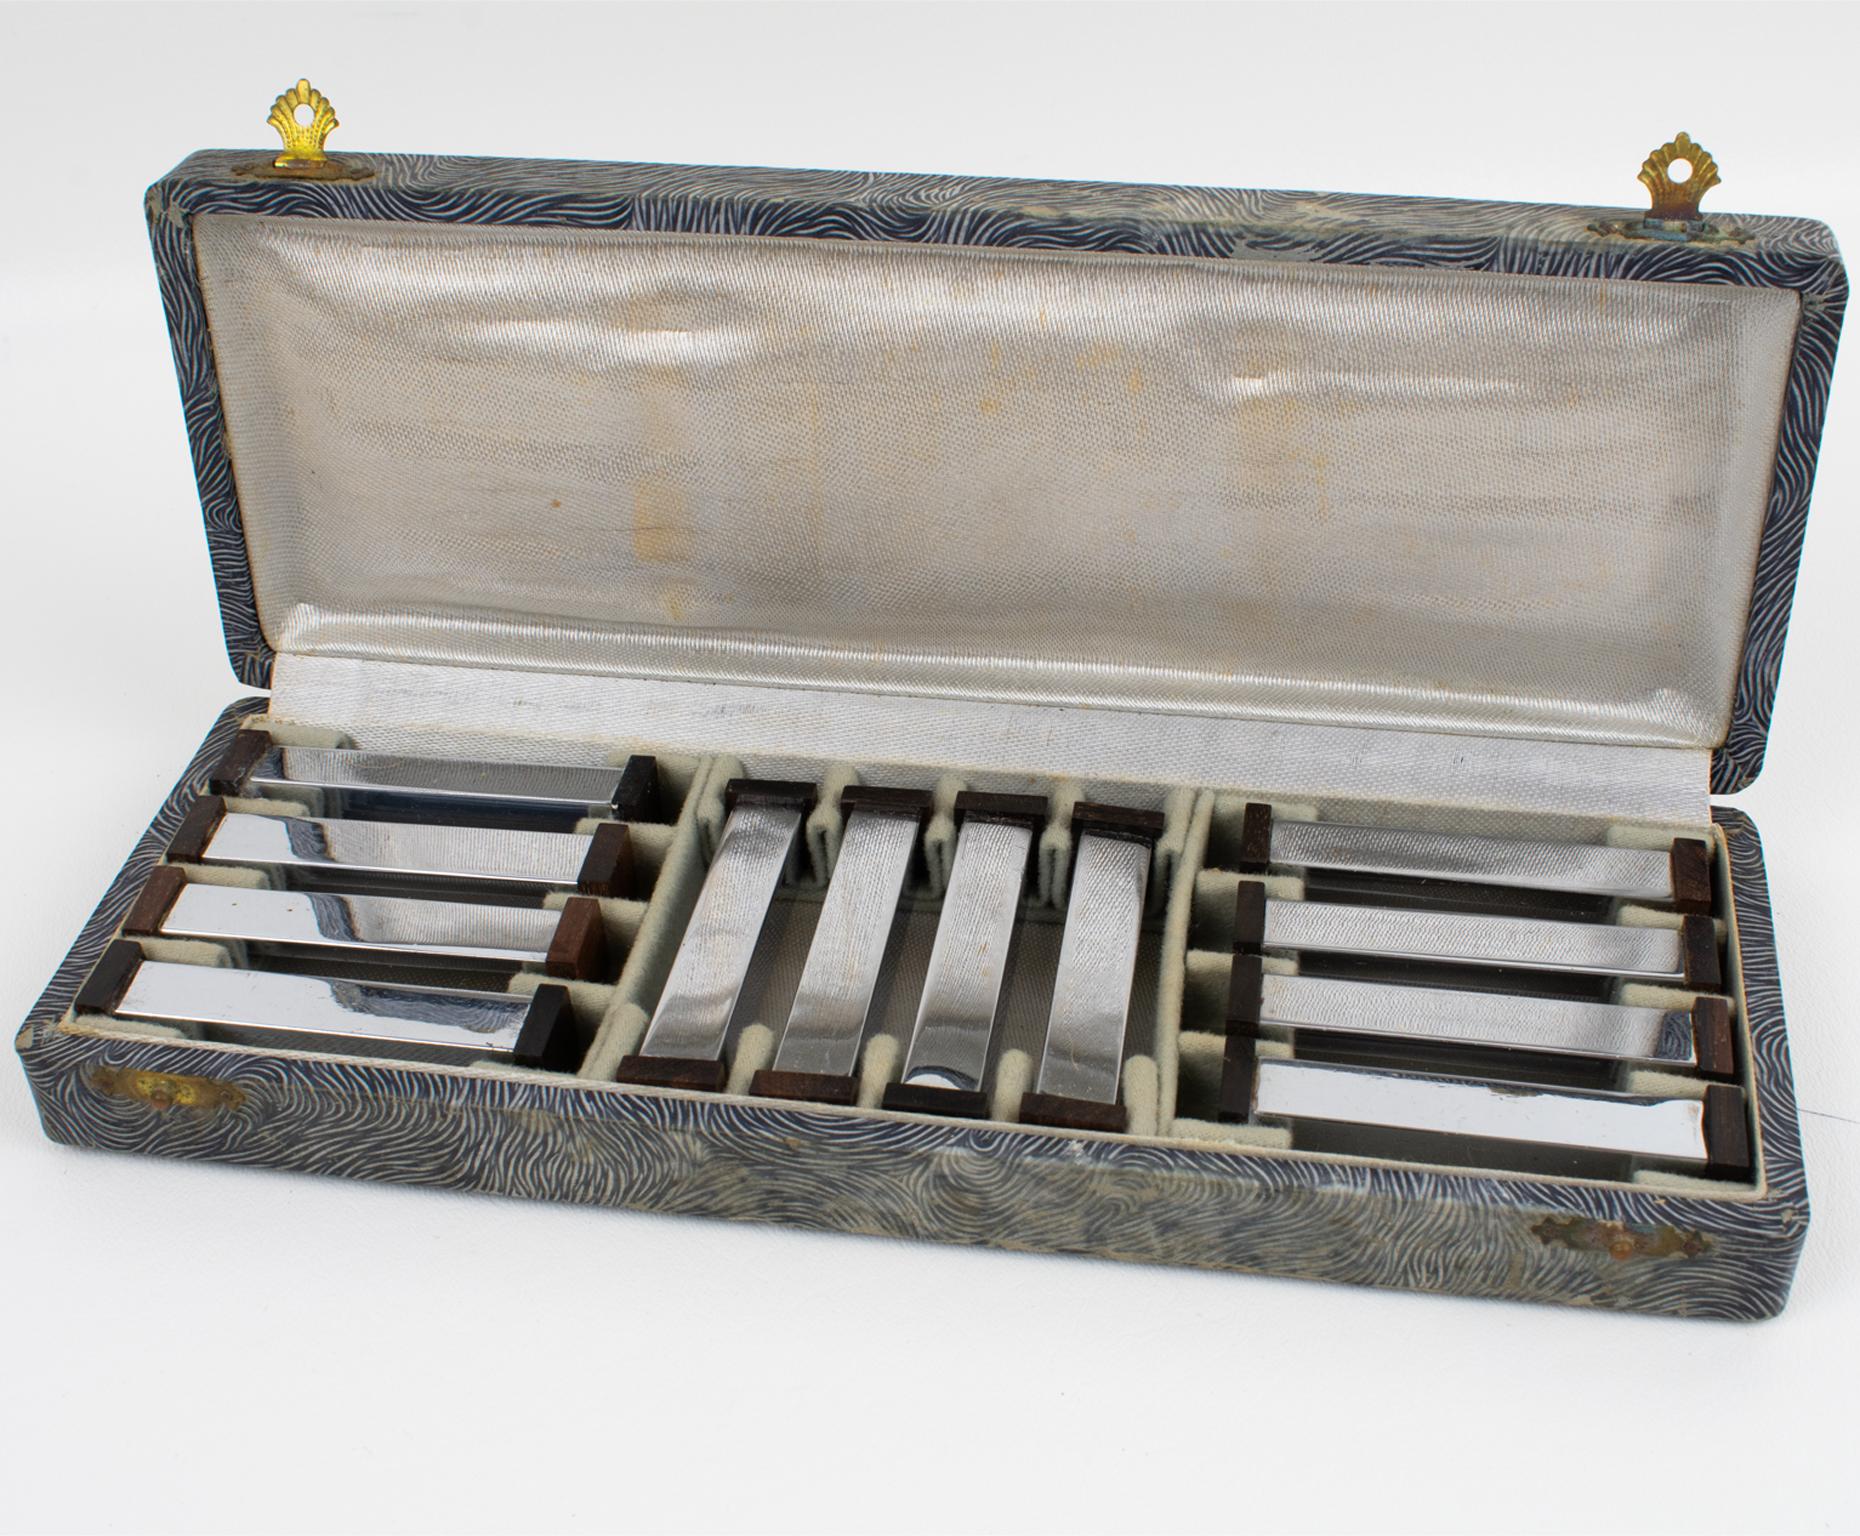 This lovely Art Deco set of twelve Macassar wood and chromed metal wood knife or chopstick rests was crafted in France in the 1930s. The tableware serving pieces feature a modernist shape with a square stick bar and geometric carved wood sides.